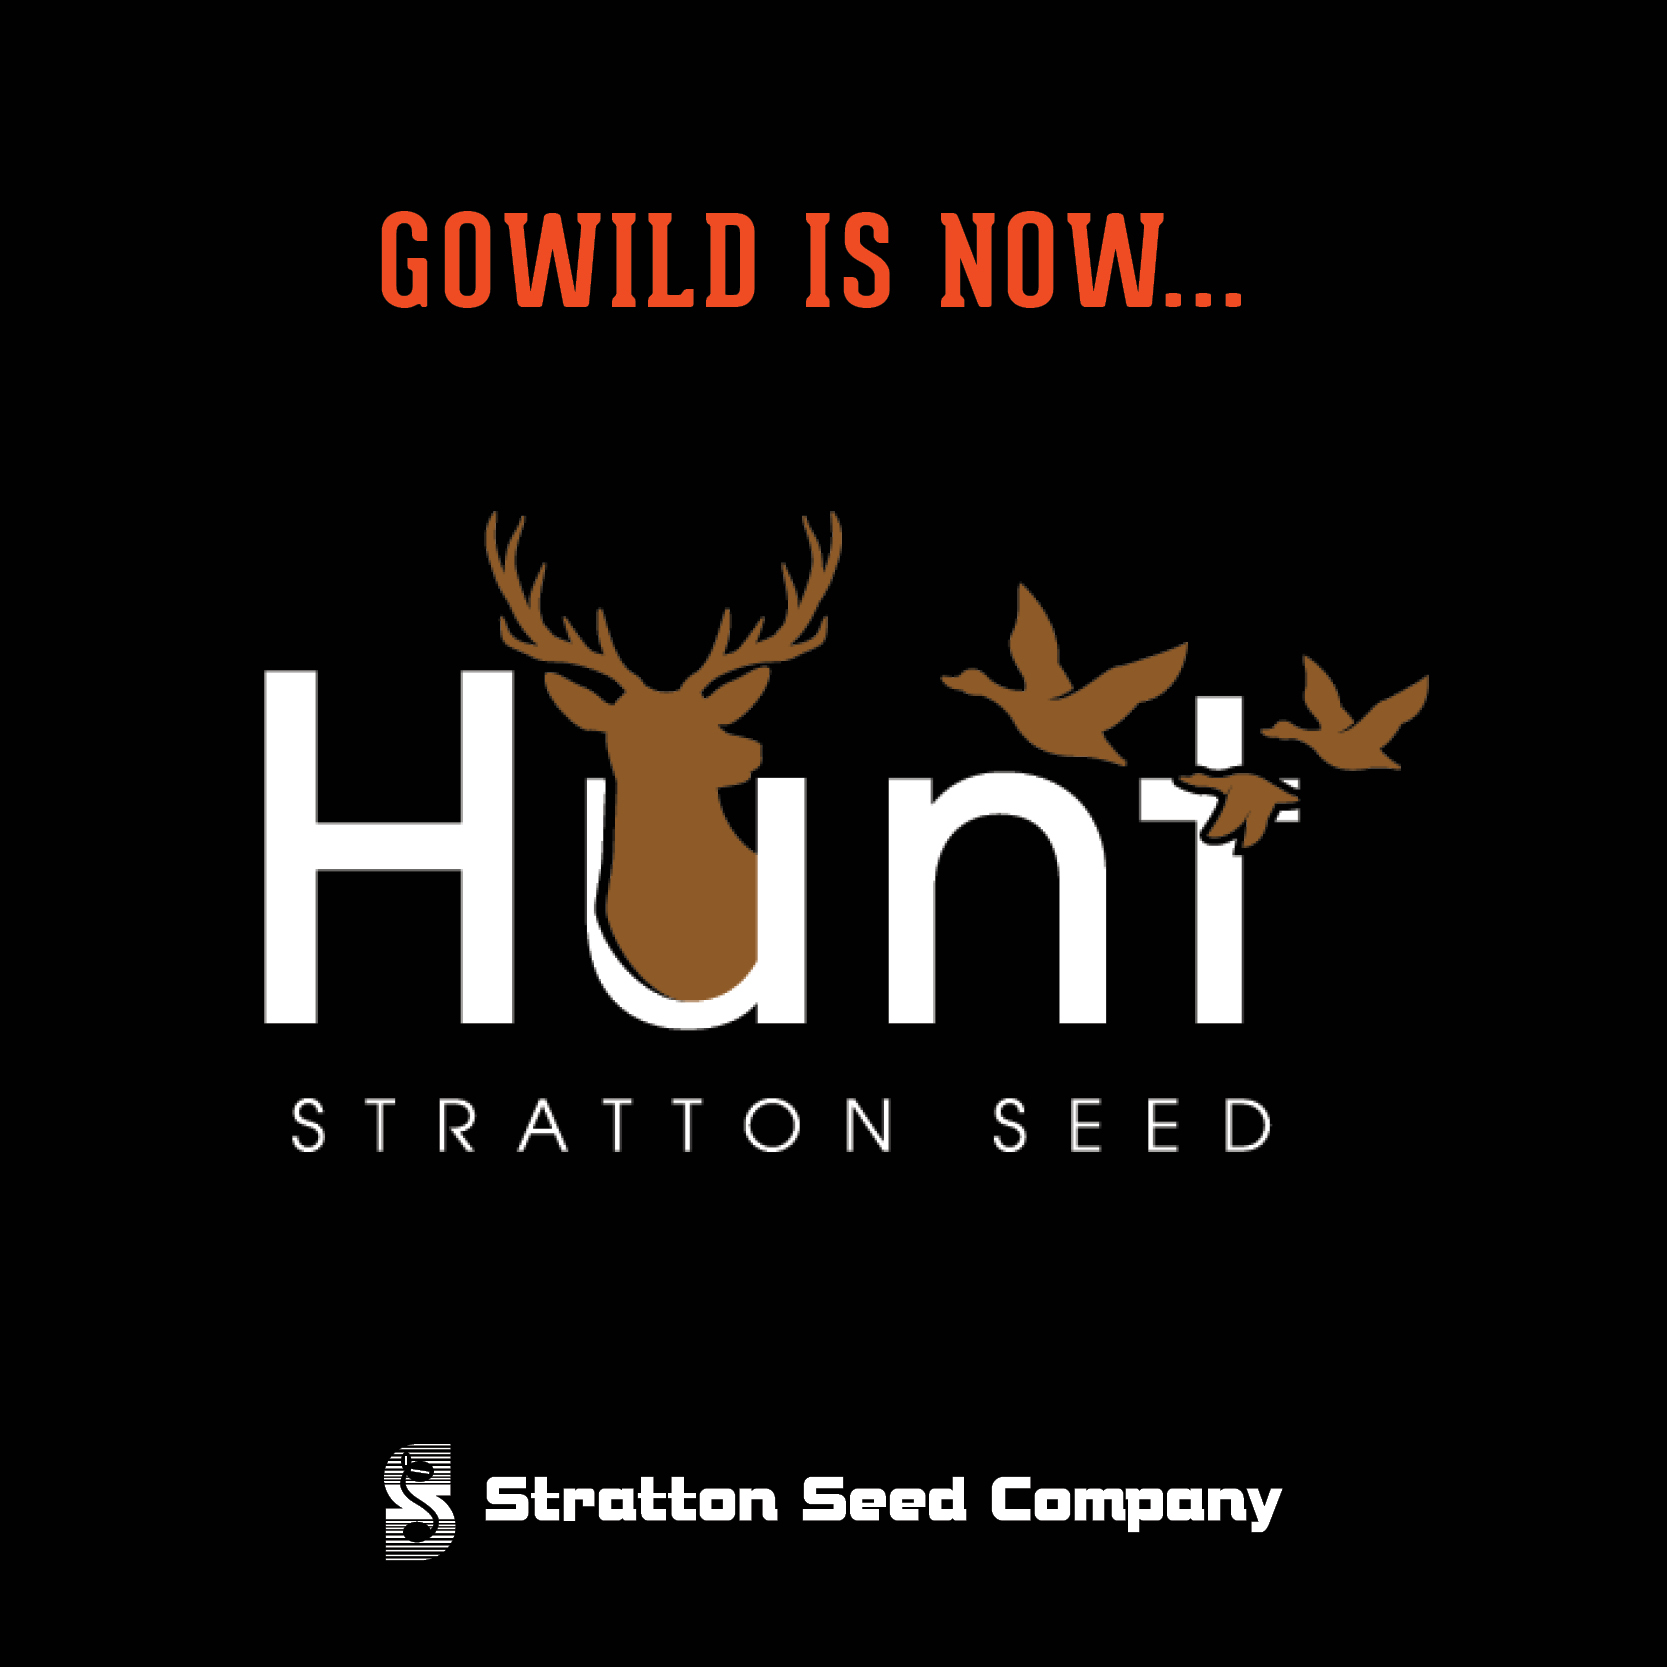 Introducing Hunt Stratton Seed